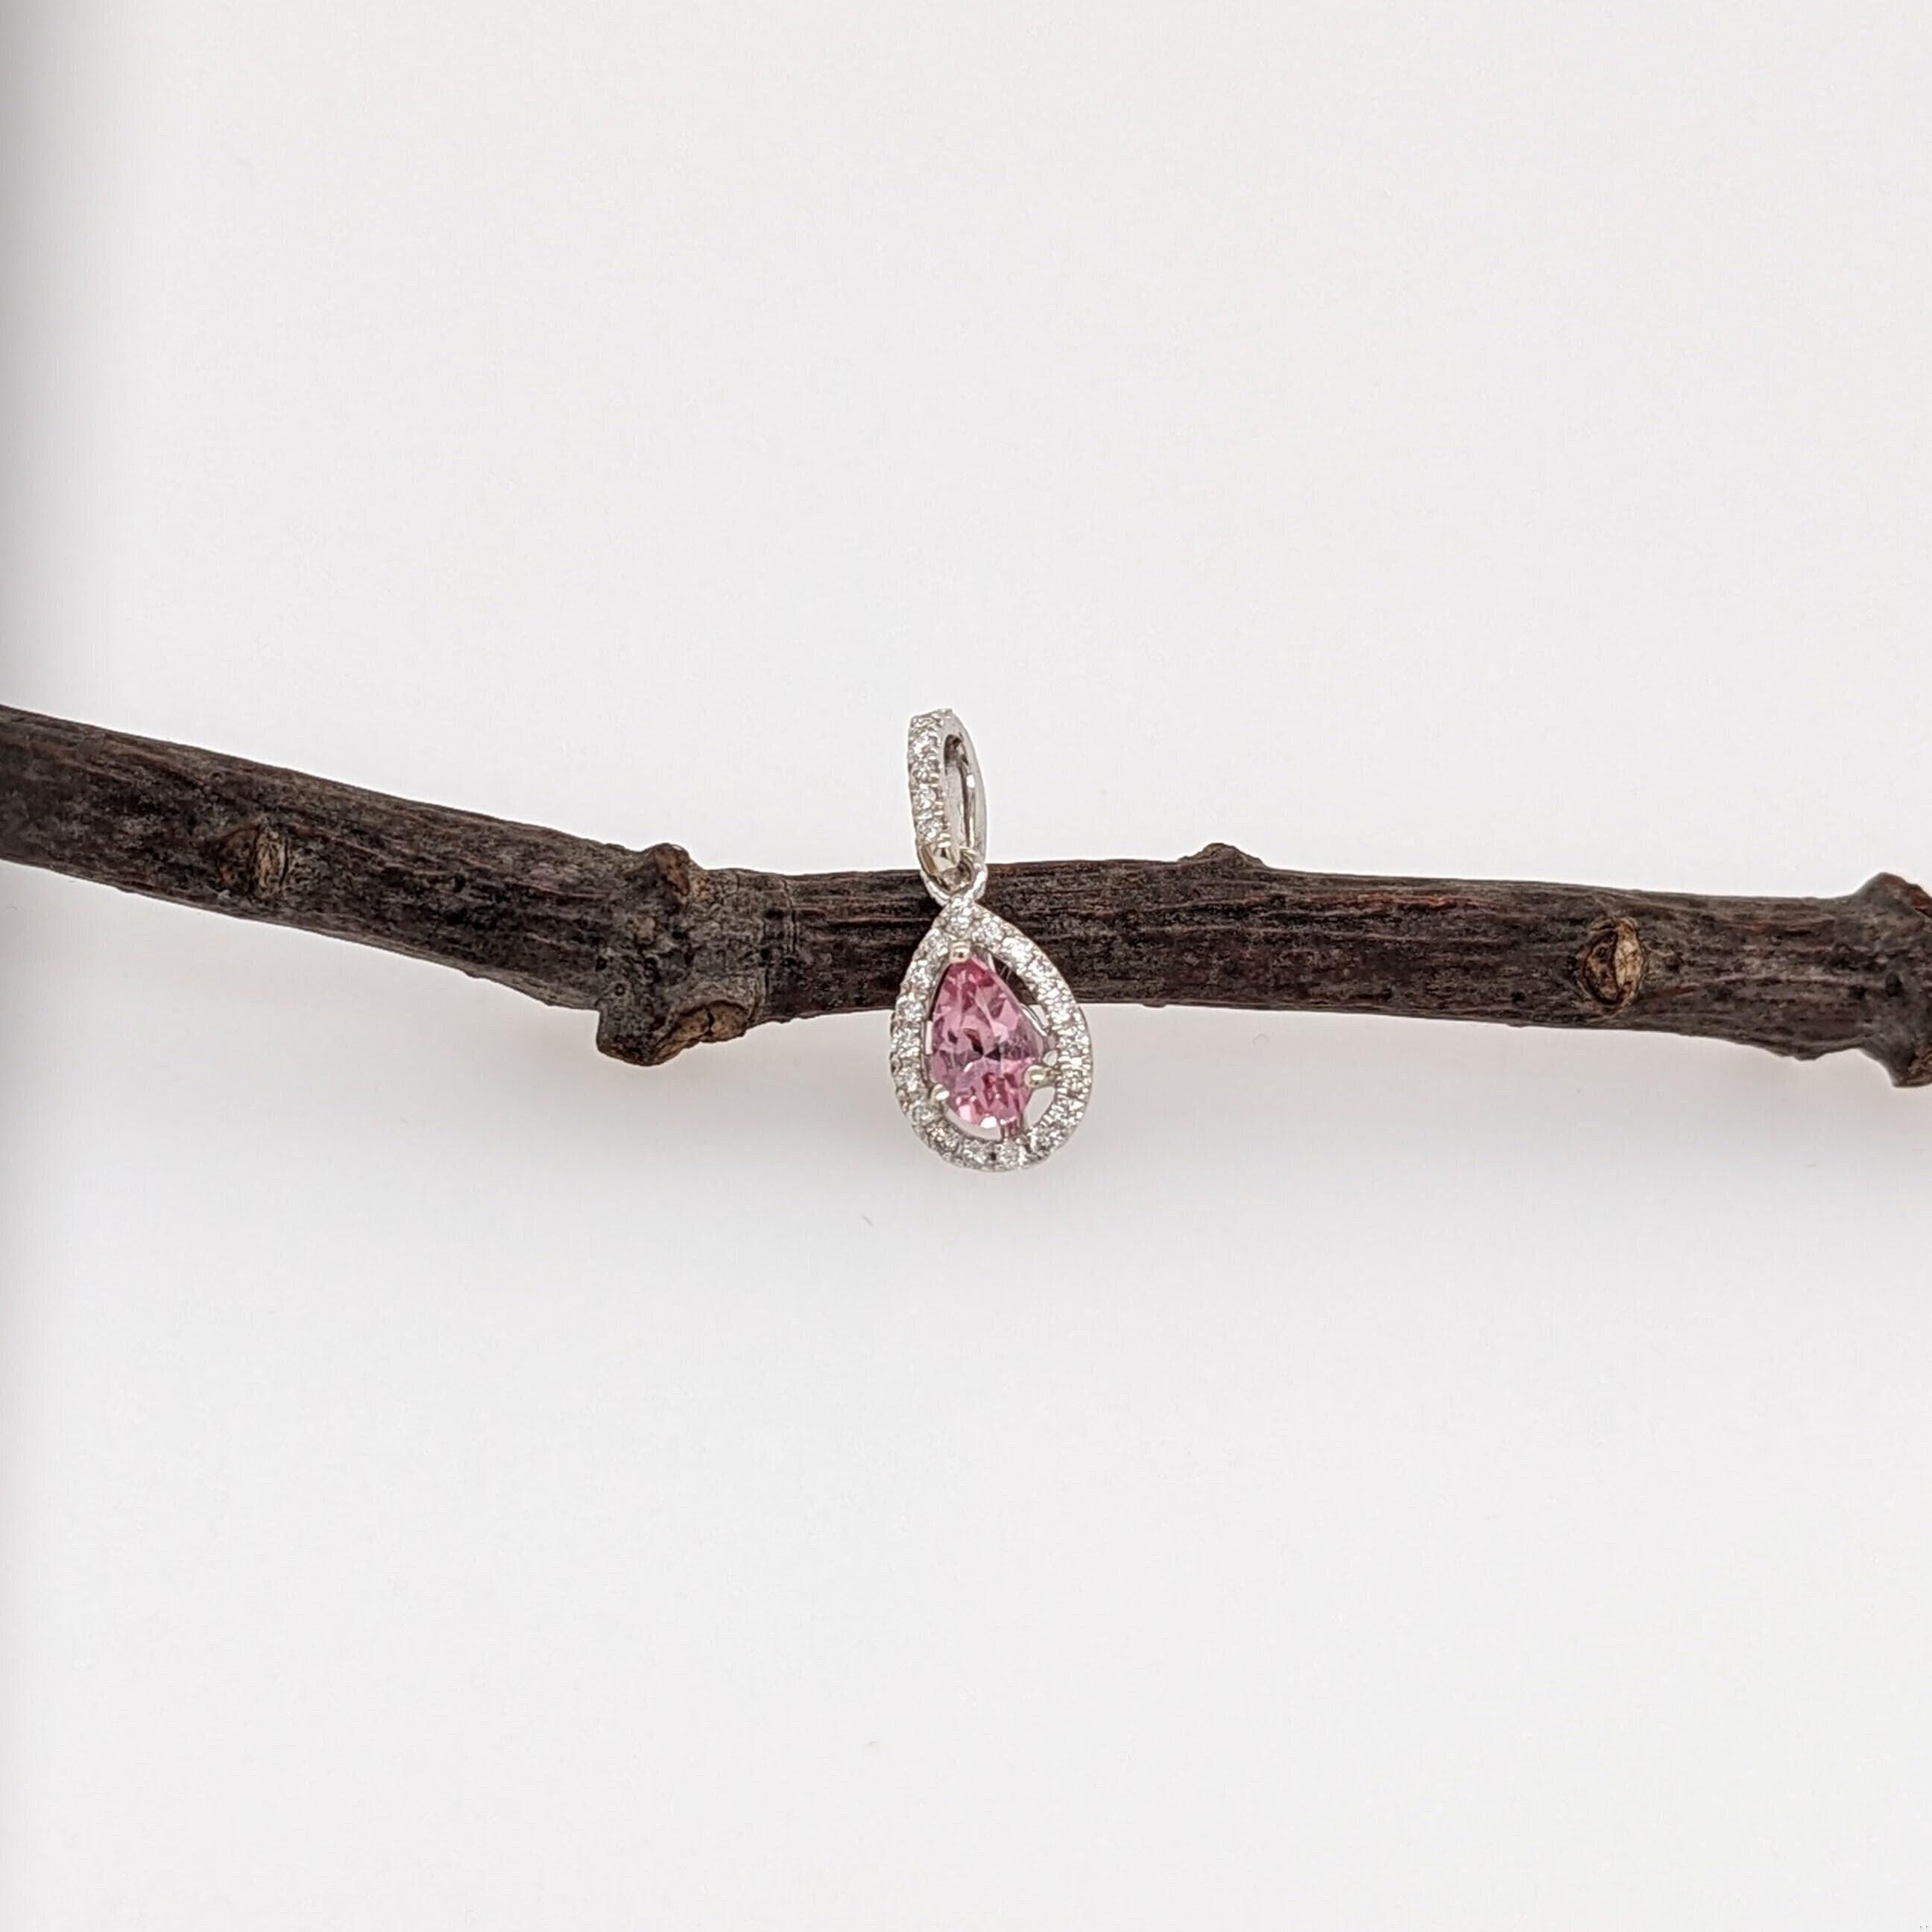 A gorgeous pendant featuring a padparadscha pink colored Imperial Topaz, pear cut and set in solid 14k white gold with all natural earth-mined diamond accents. Perfect for gifts, anniversaries, or any special occasion! 

Specifications

Item Type: